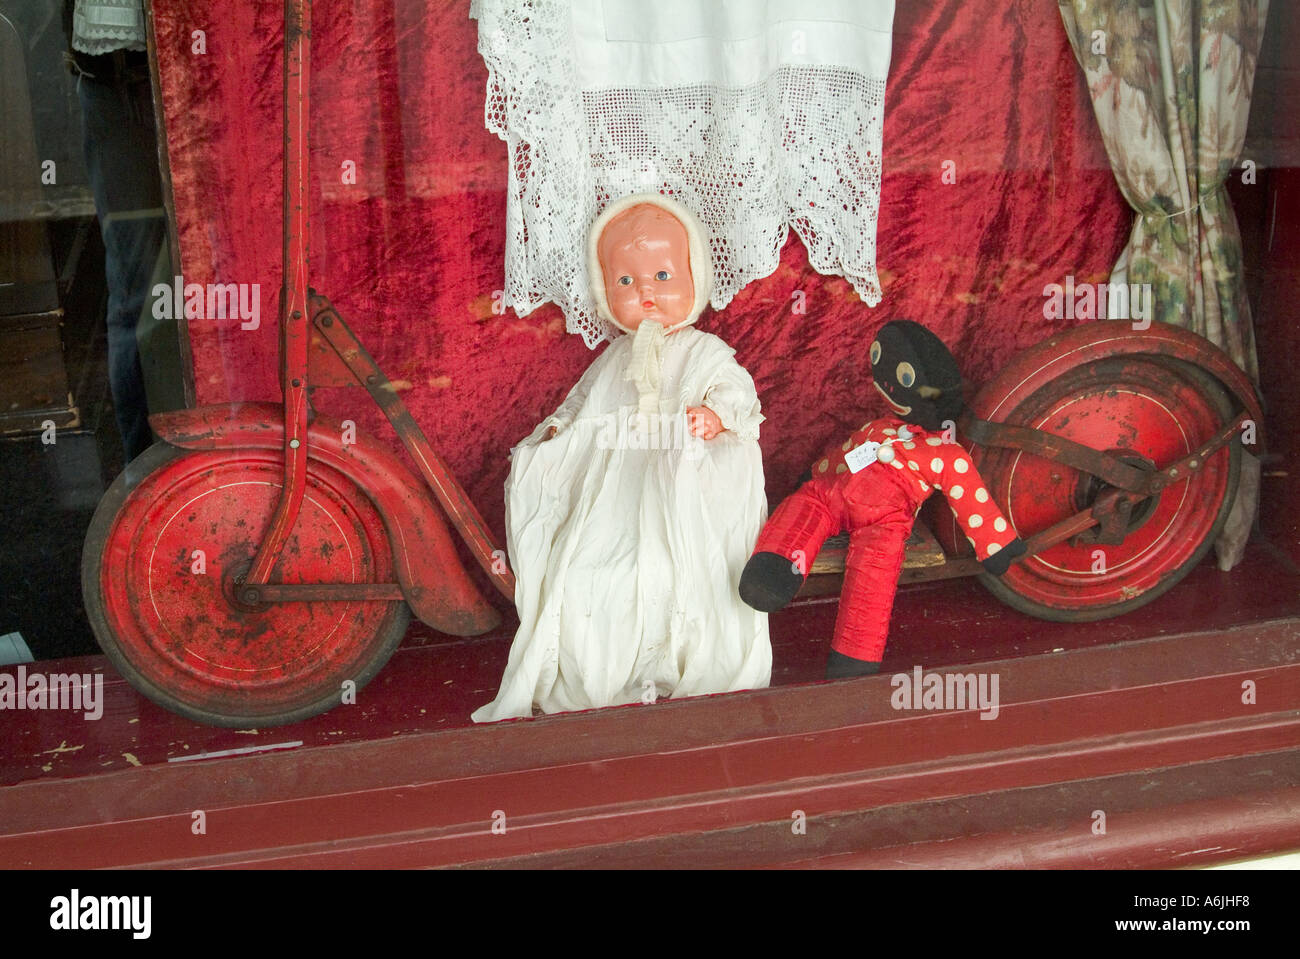 Antique shop window displaying doll old scooter and golliwog Stock Photo